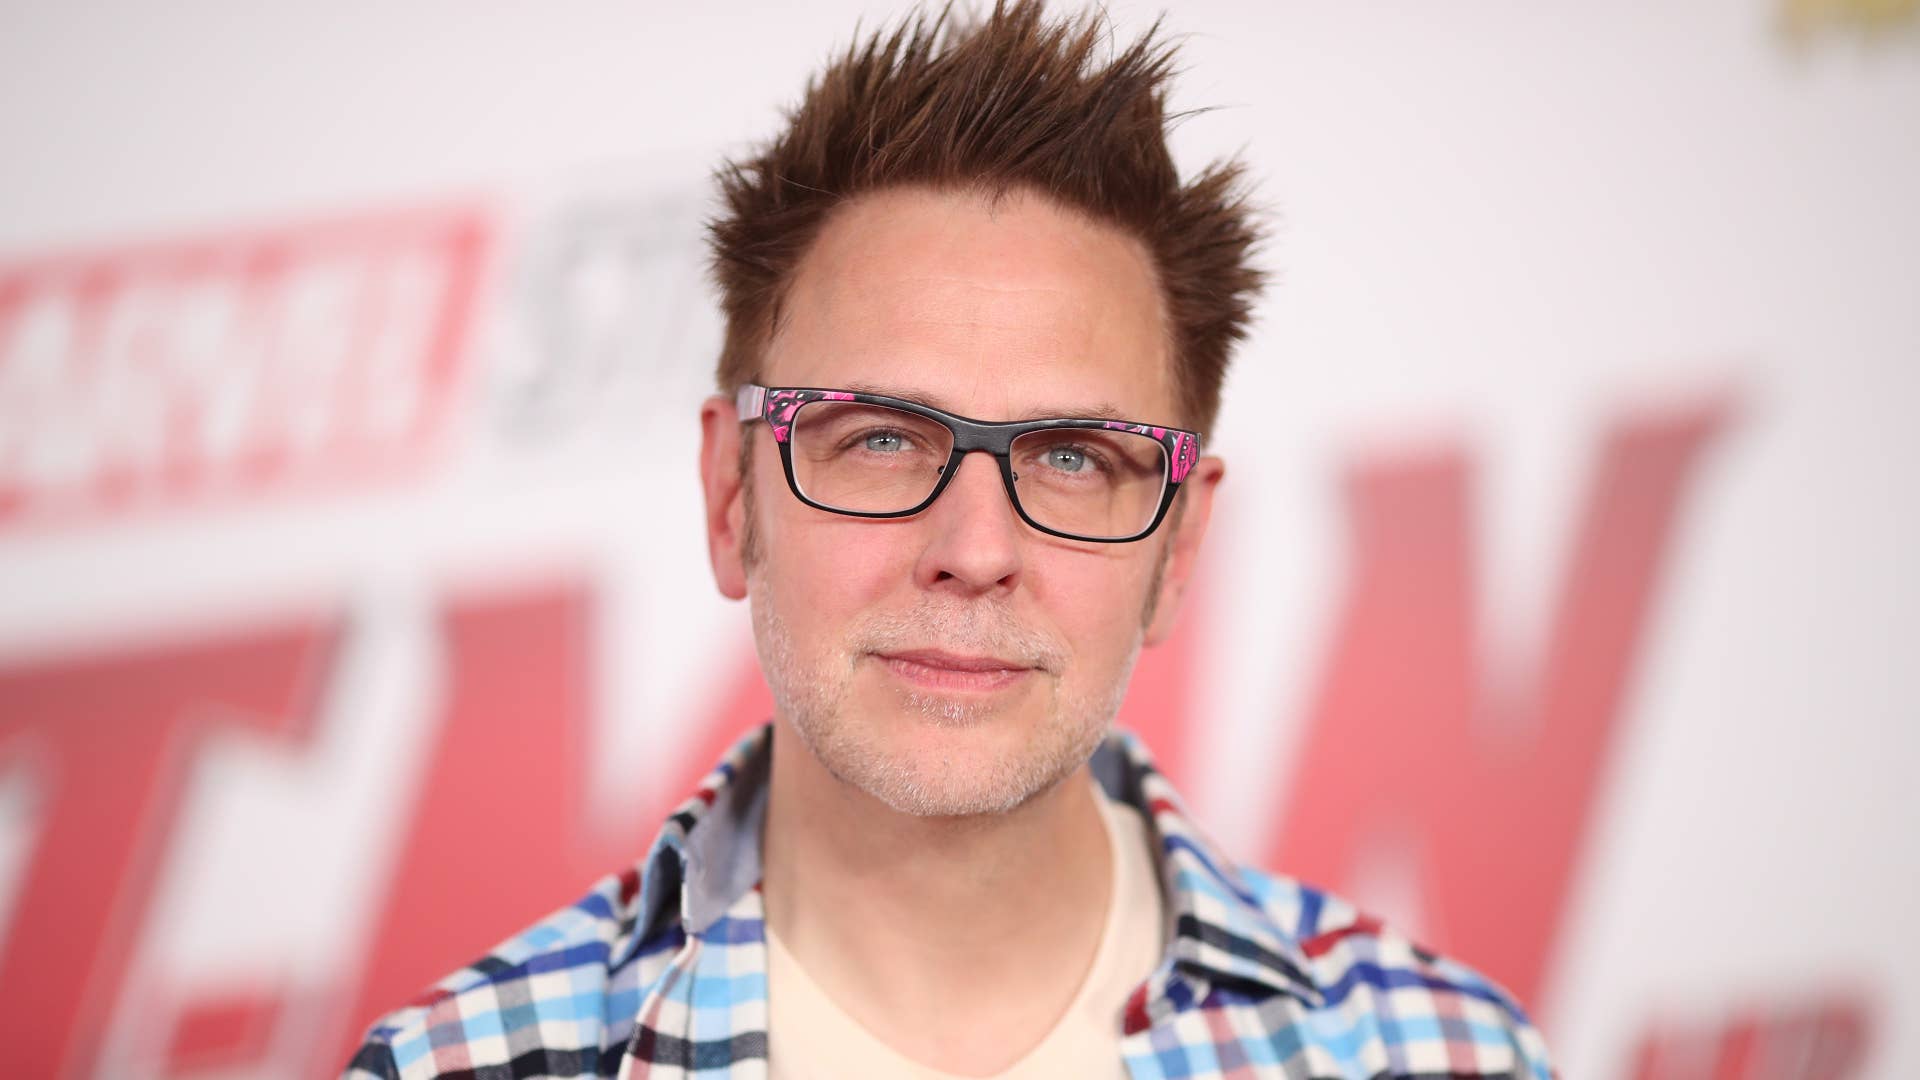 James Gunn attends the premiere of "Ant-Man And The Wasp."